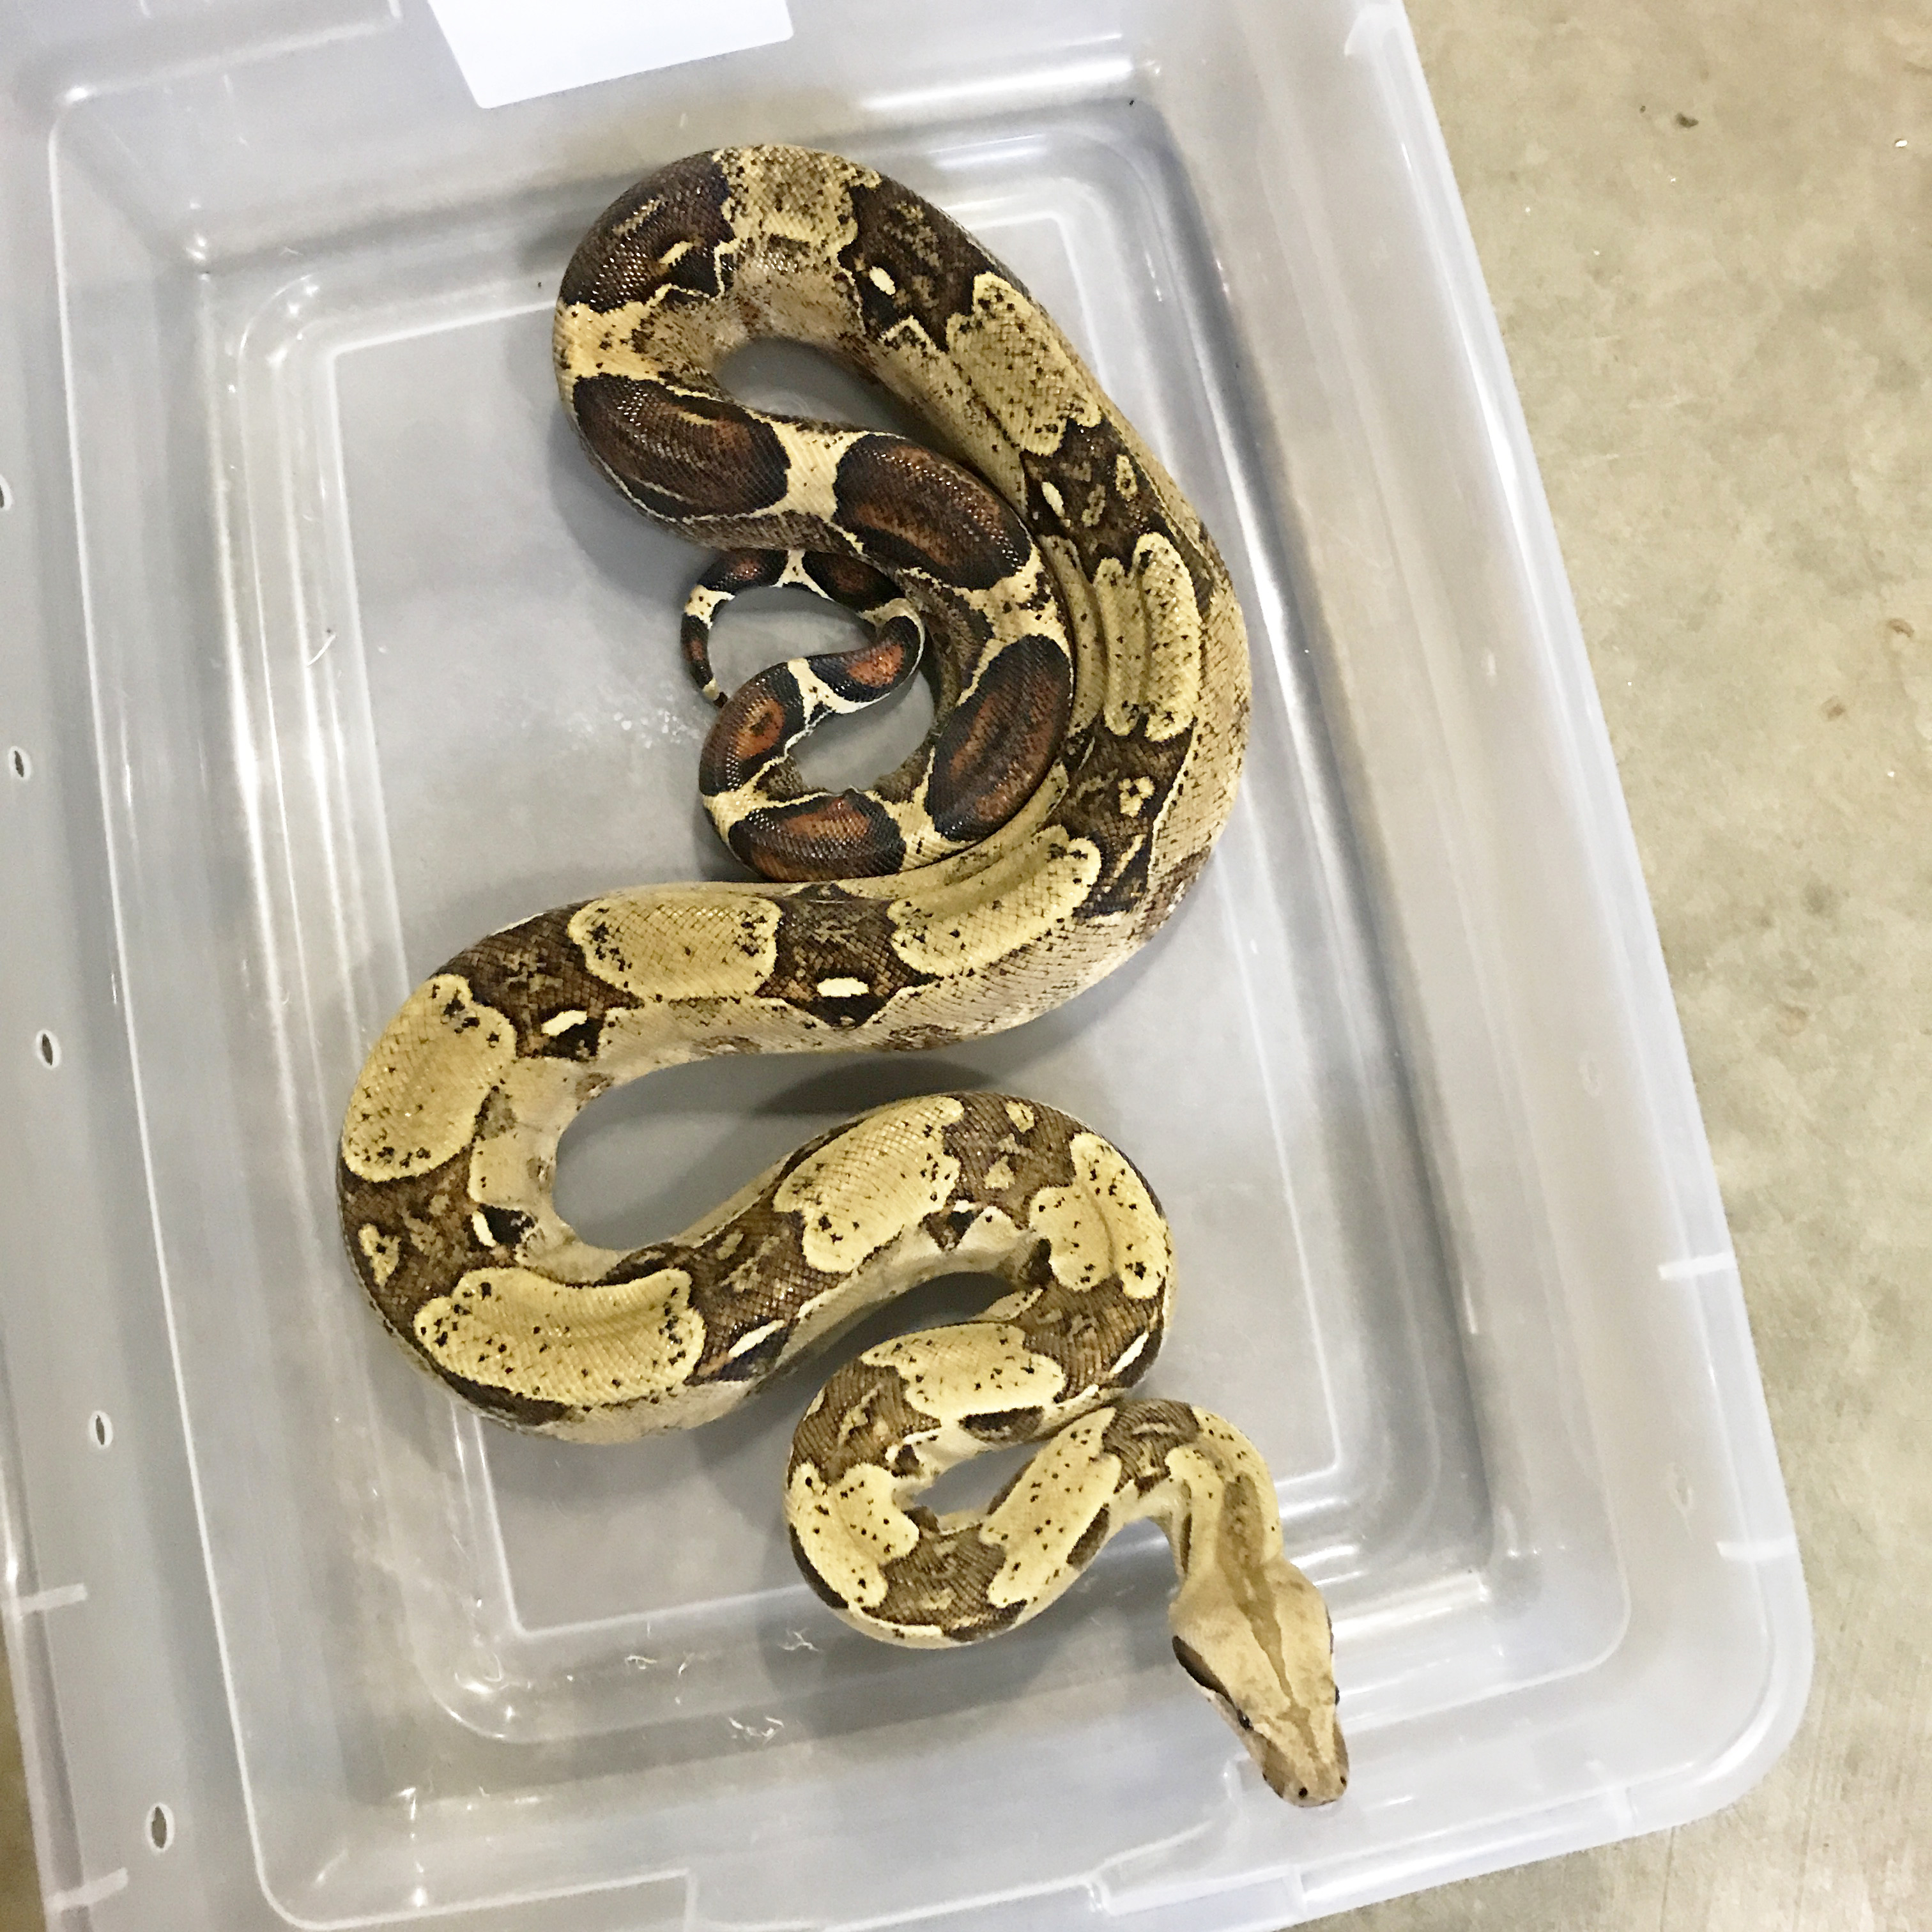 Harlequin Boa Constrictor by Boas Abound